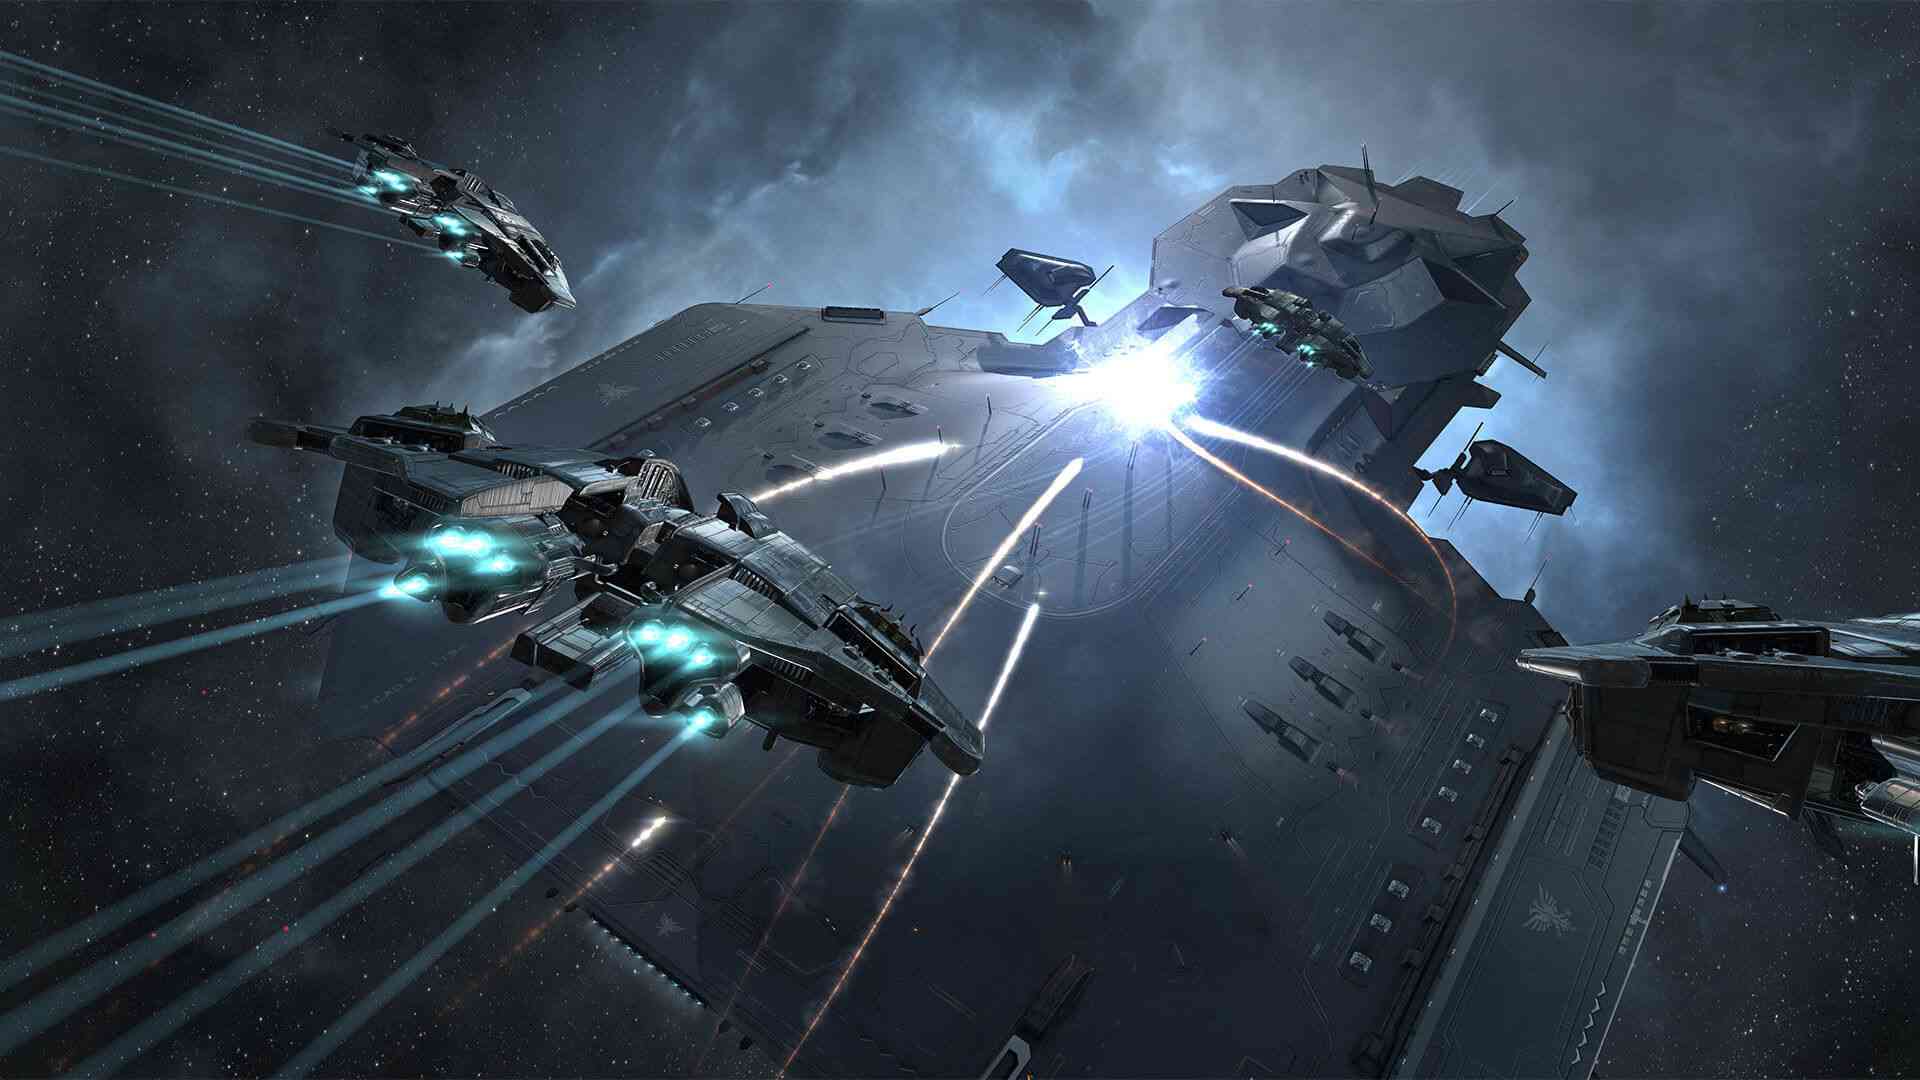 ccp games celebrates eve online 16th anniversary with free in game content 2336 big 1